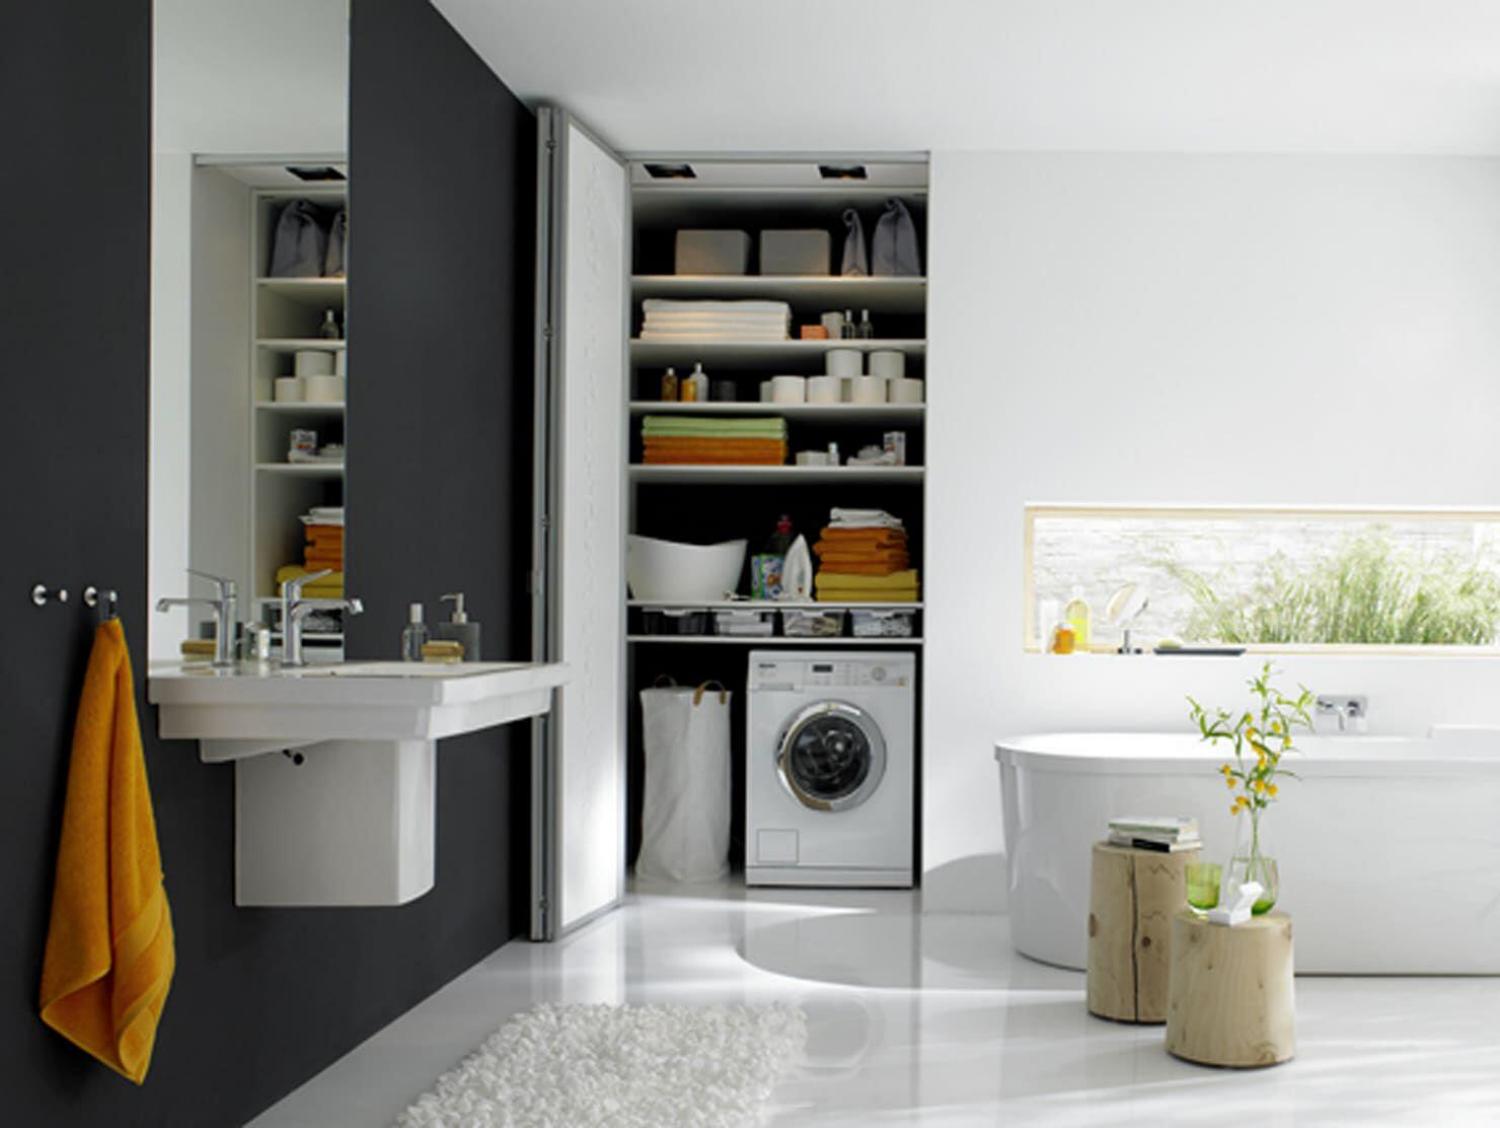 How to Install a Washing Machine in the Bathroom? - Blog - 3